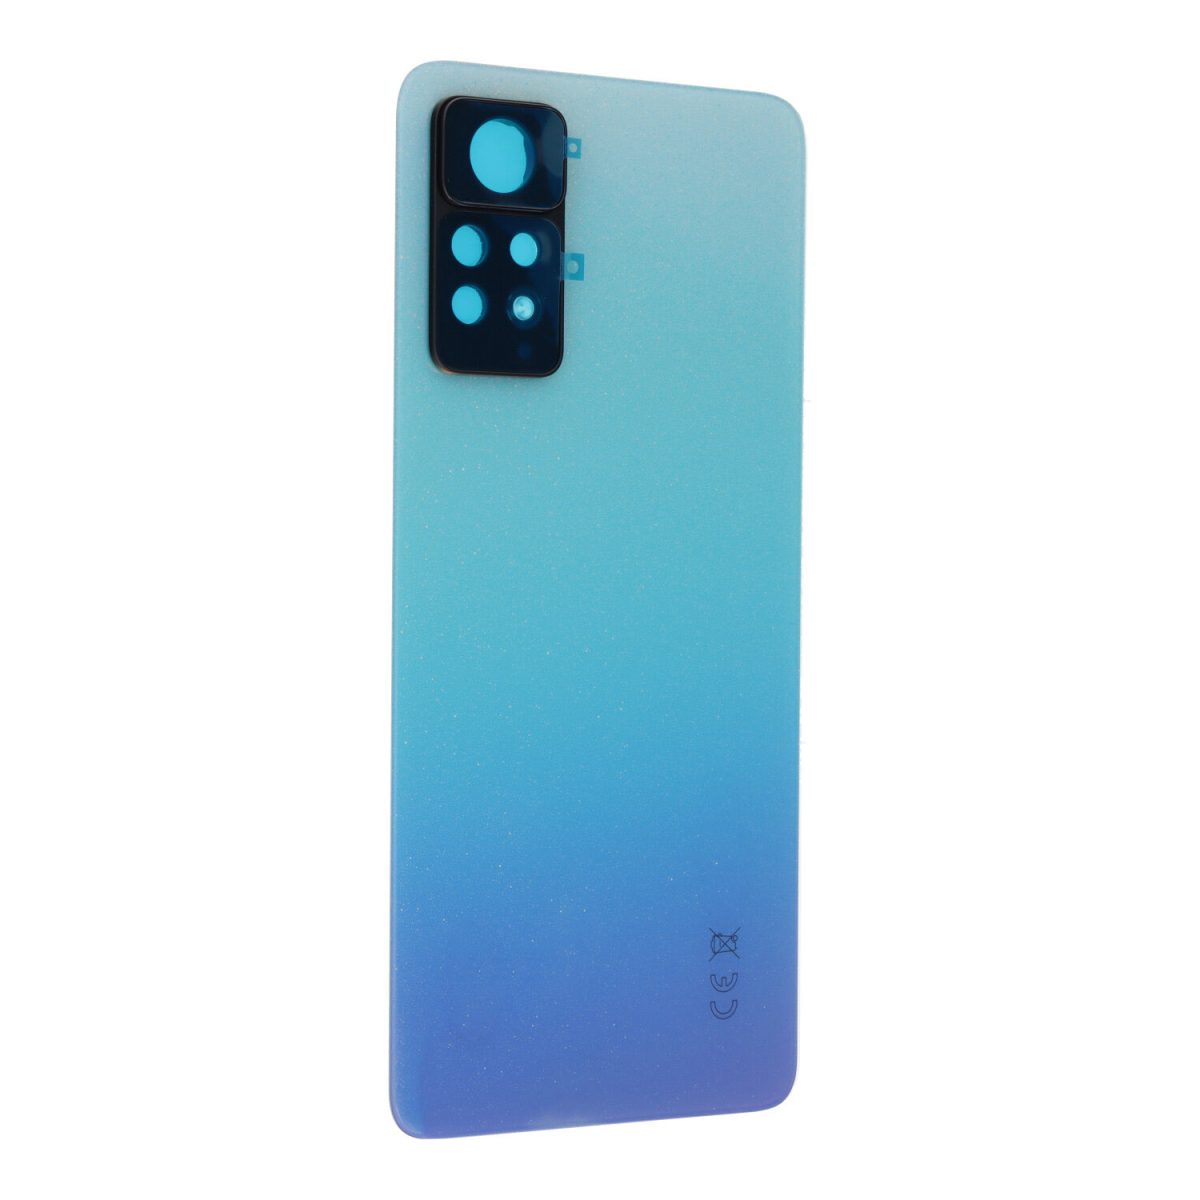 Backcover for Xiaomi Redmi Note 11 Pro - Blue - OEM